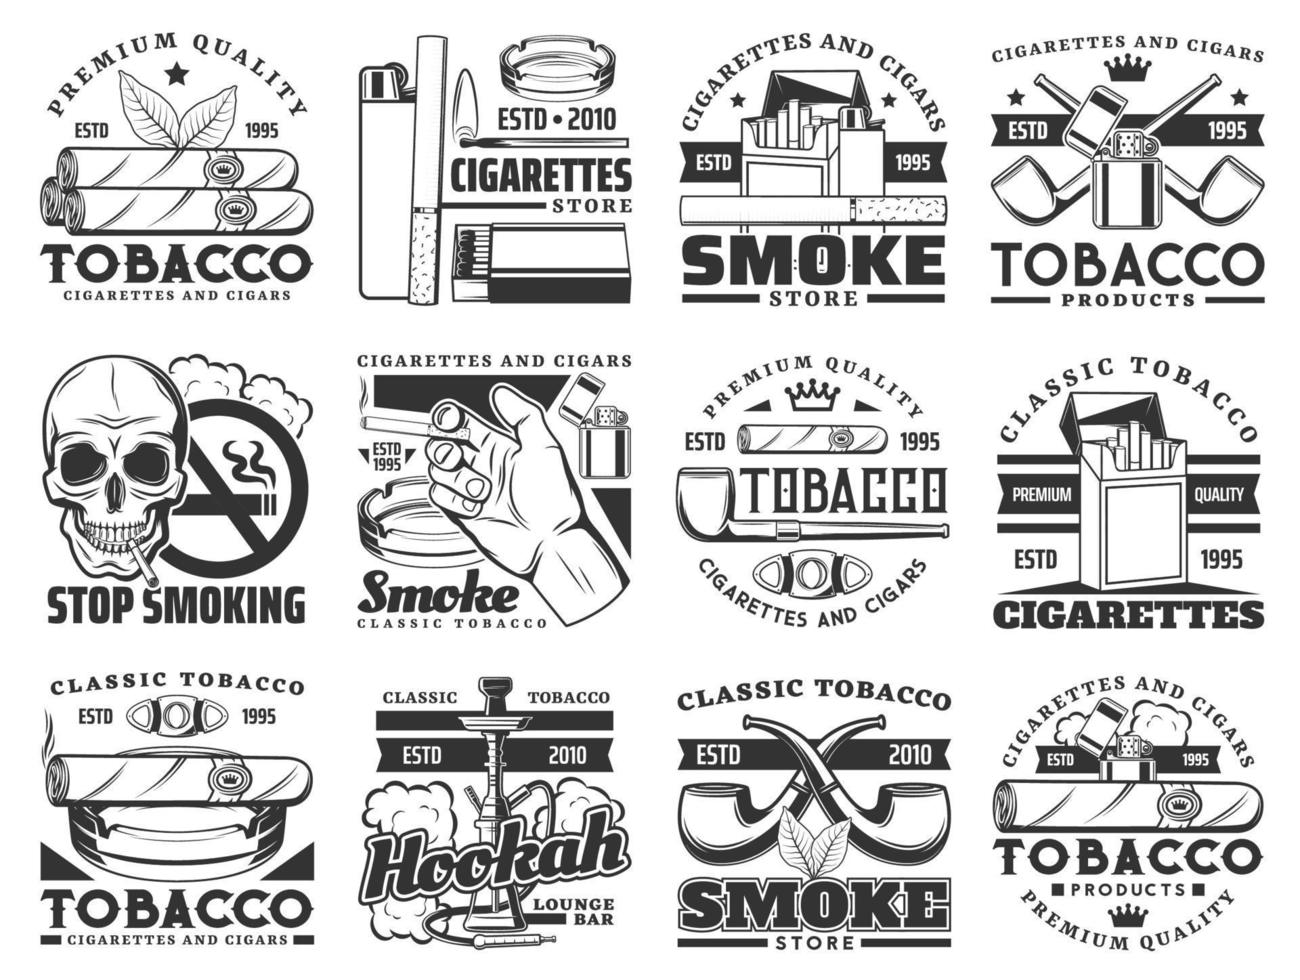 Cigarette pack, cigar, pipe, tobacco leaf icons vector